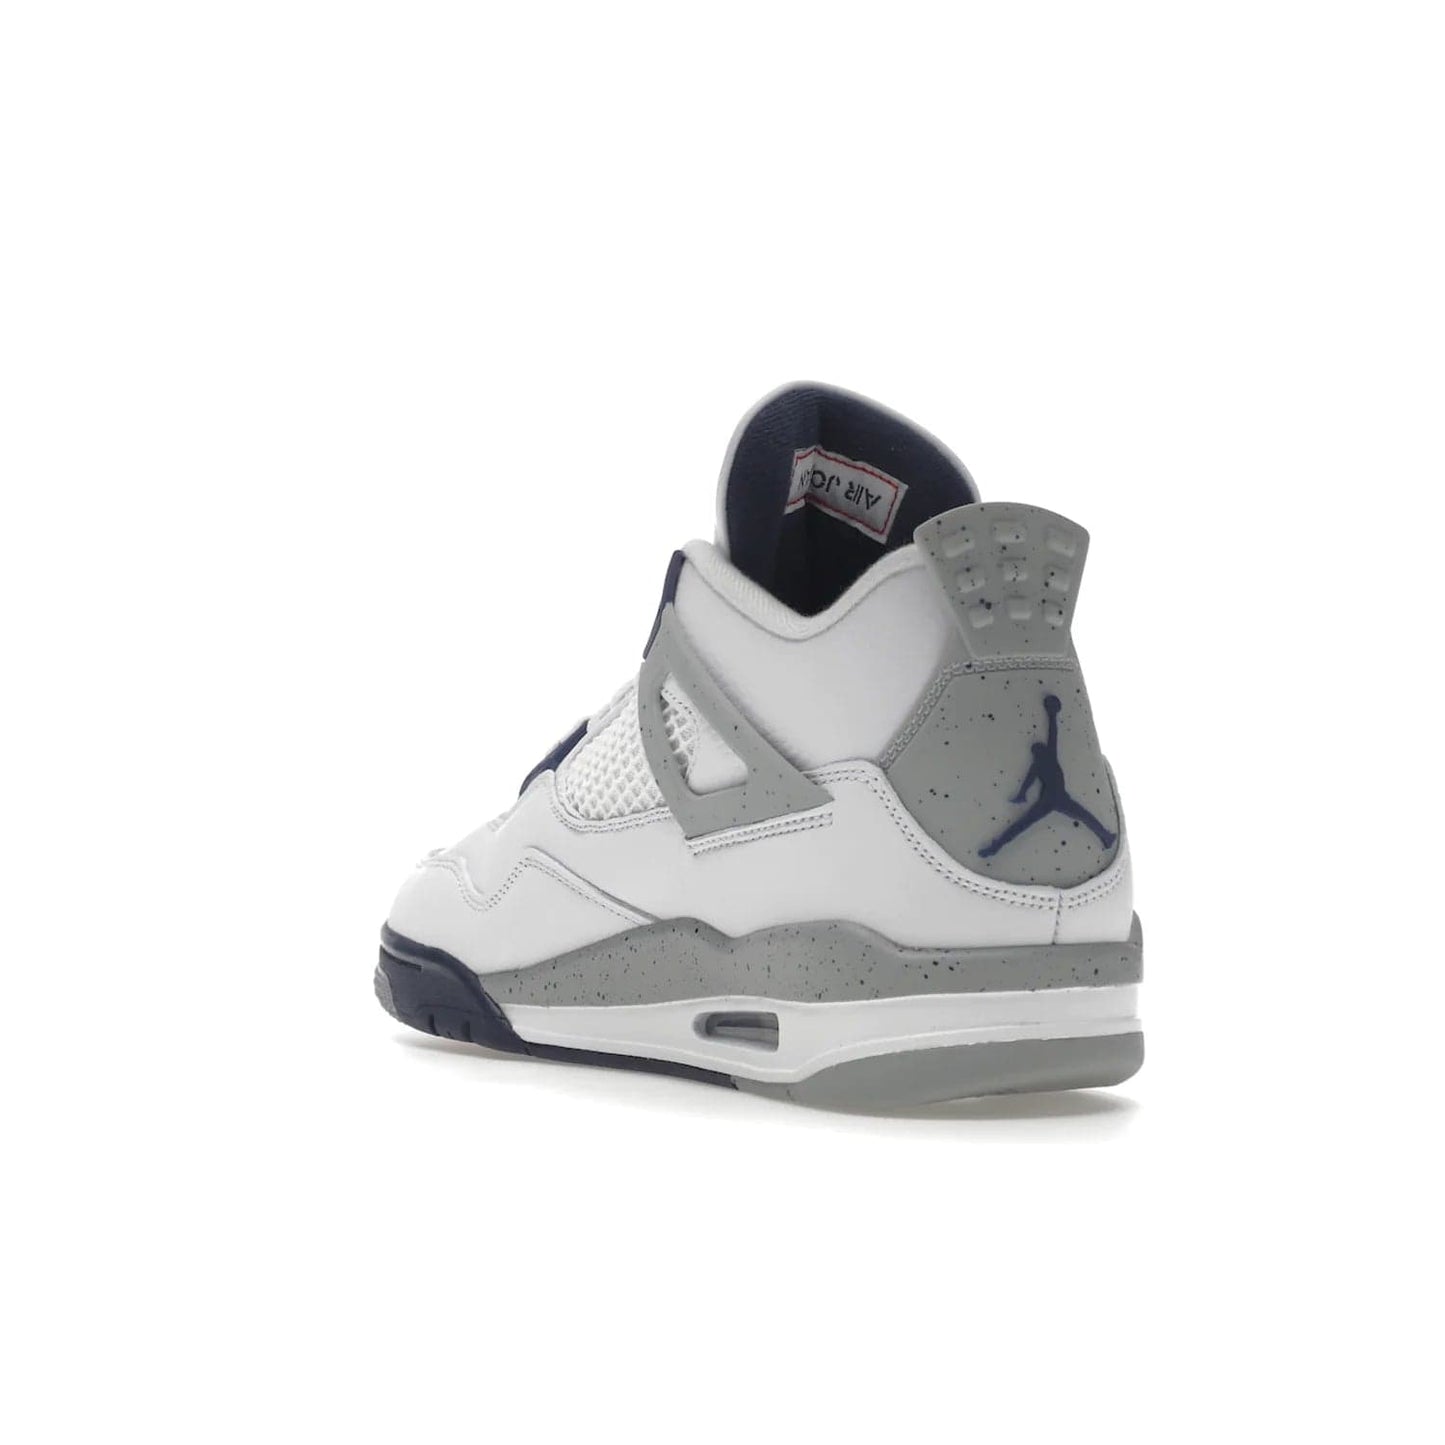 Jordan 4 Retro Midnight Navy - Image 25 - Only at www.BallersClubKickz.com - Shop the Air Jordan Retro 4 White Midnight Navy. Stand out with a classic white leather upper, black support wings, midnight navy eyelets, and Crimson Jumpman tongue tag. Unbeatable comfort with two-tone polyurethane midsole with encapsulated Air technology. Get yours before October 29th, 2022.